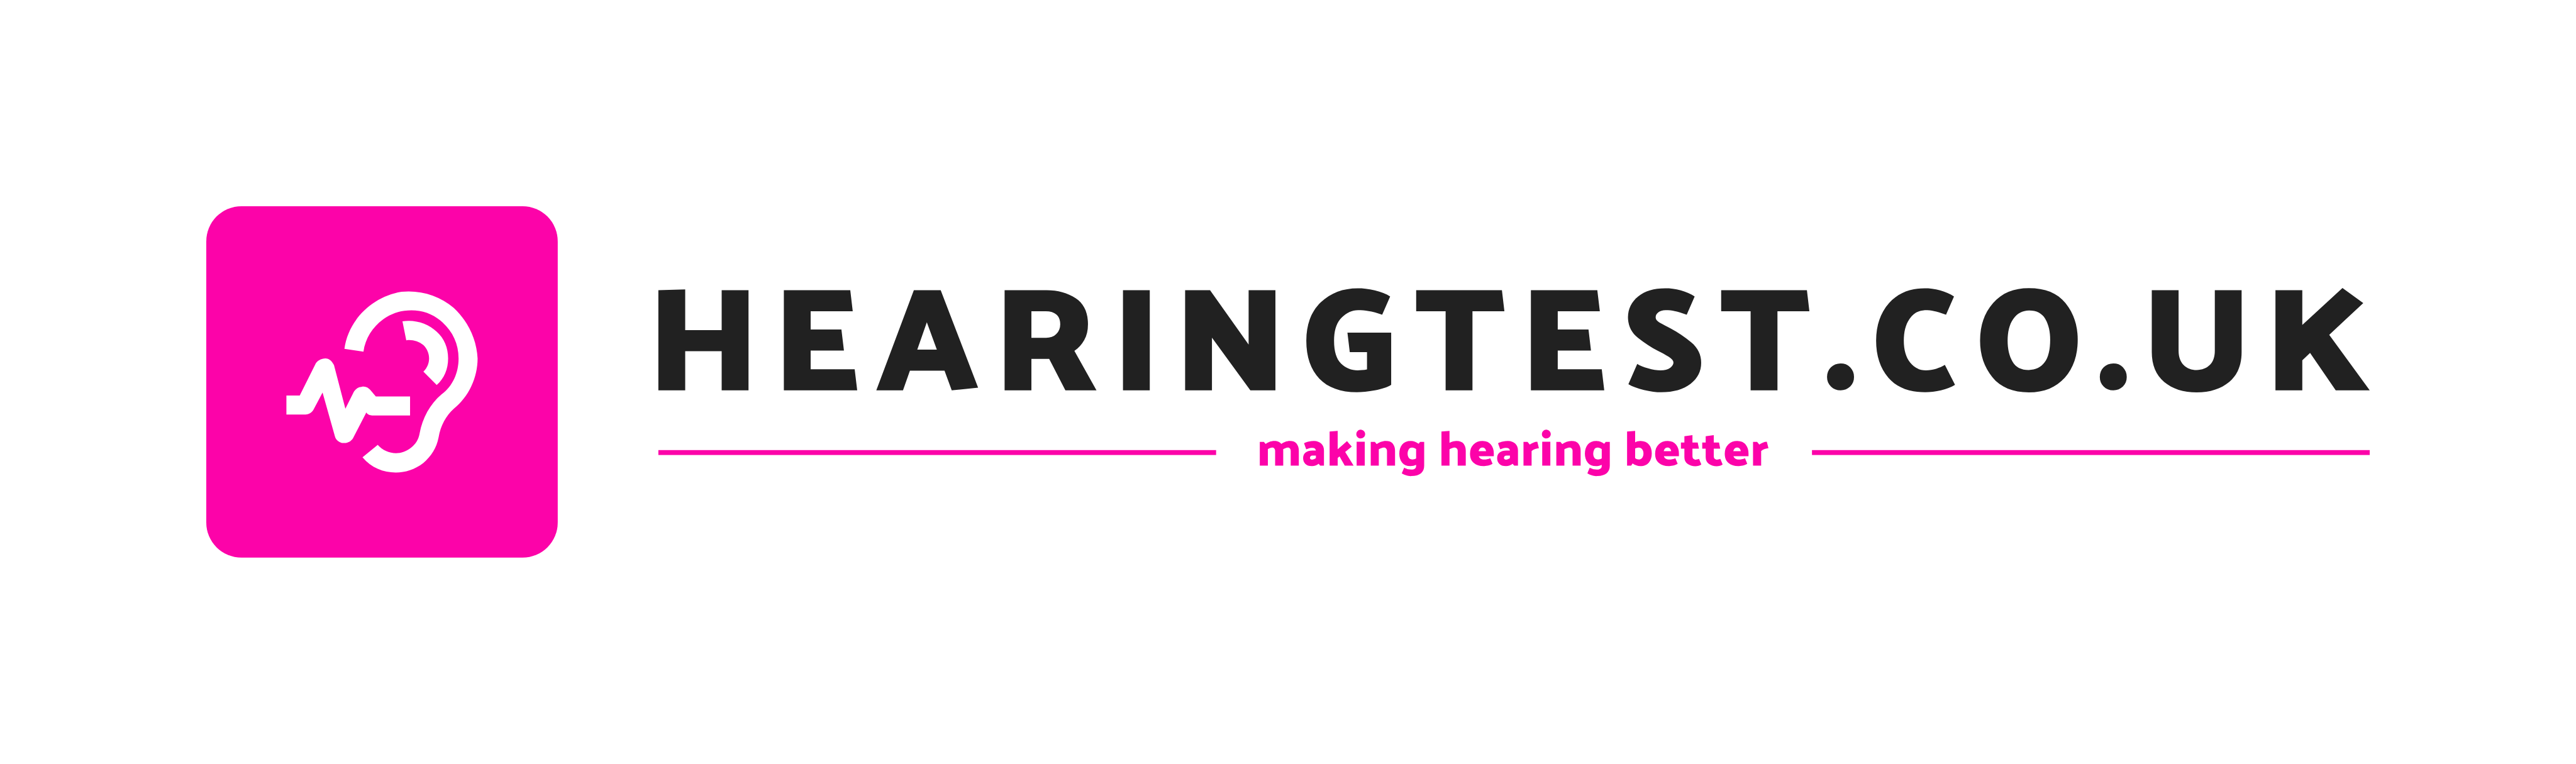 Free Hearing Test for Adults in Dunbar | Hearingtest.co.uk